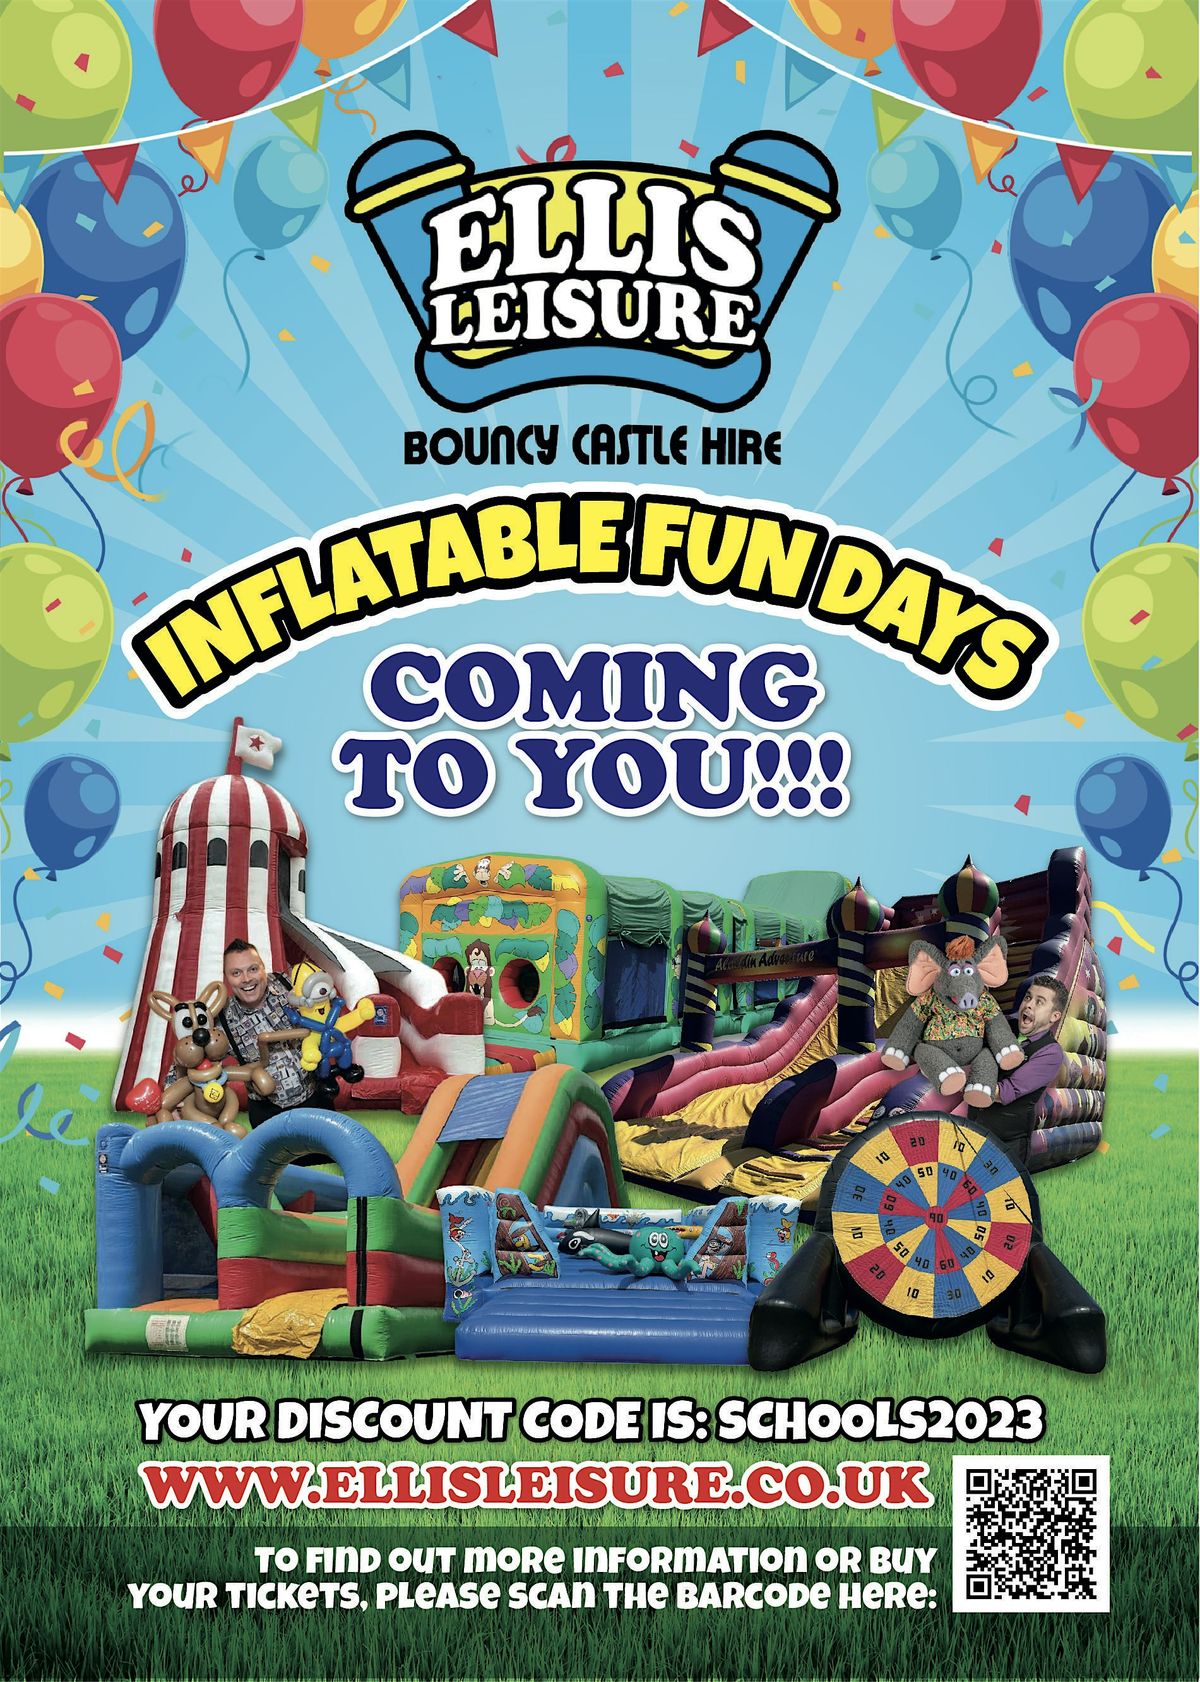 Outdoor Inflatable Fun Day - Chalkwell Park SS0 8NL